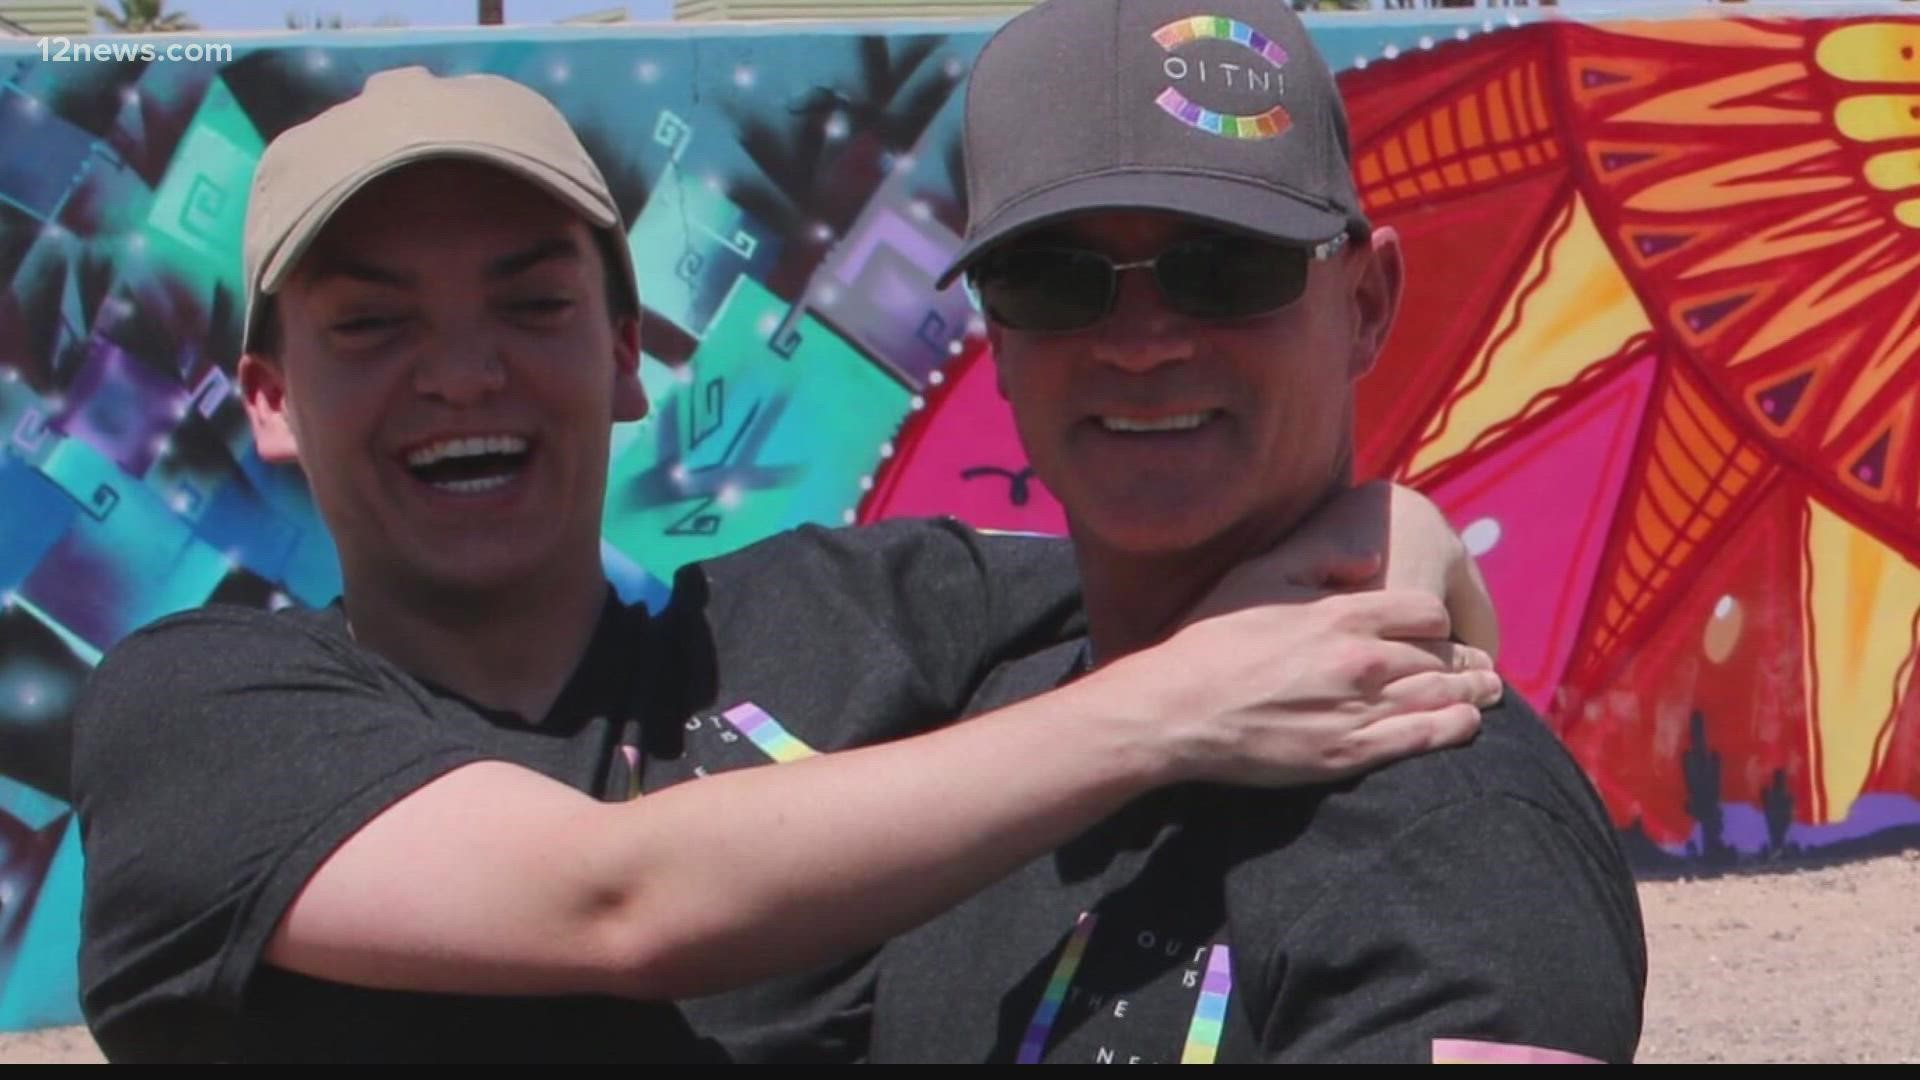 A retired Scottsdale police officer has found a new way to protect and serve. Johnnie Ghiglia and his son started a non-profit to support LGBTQ youth.